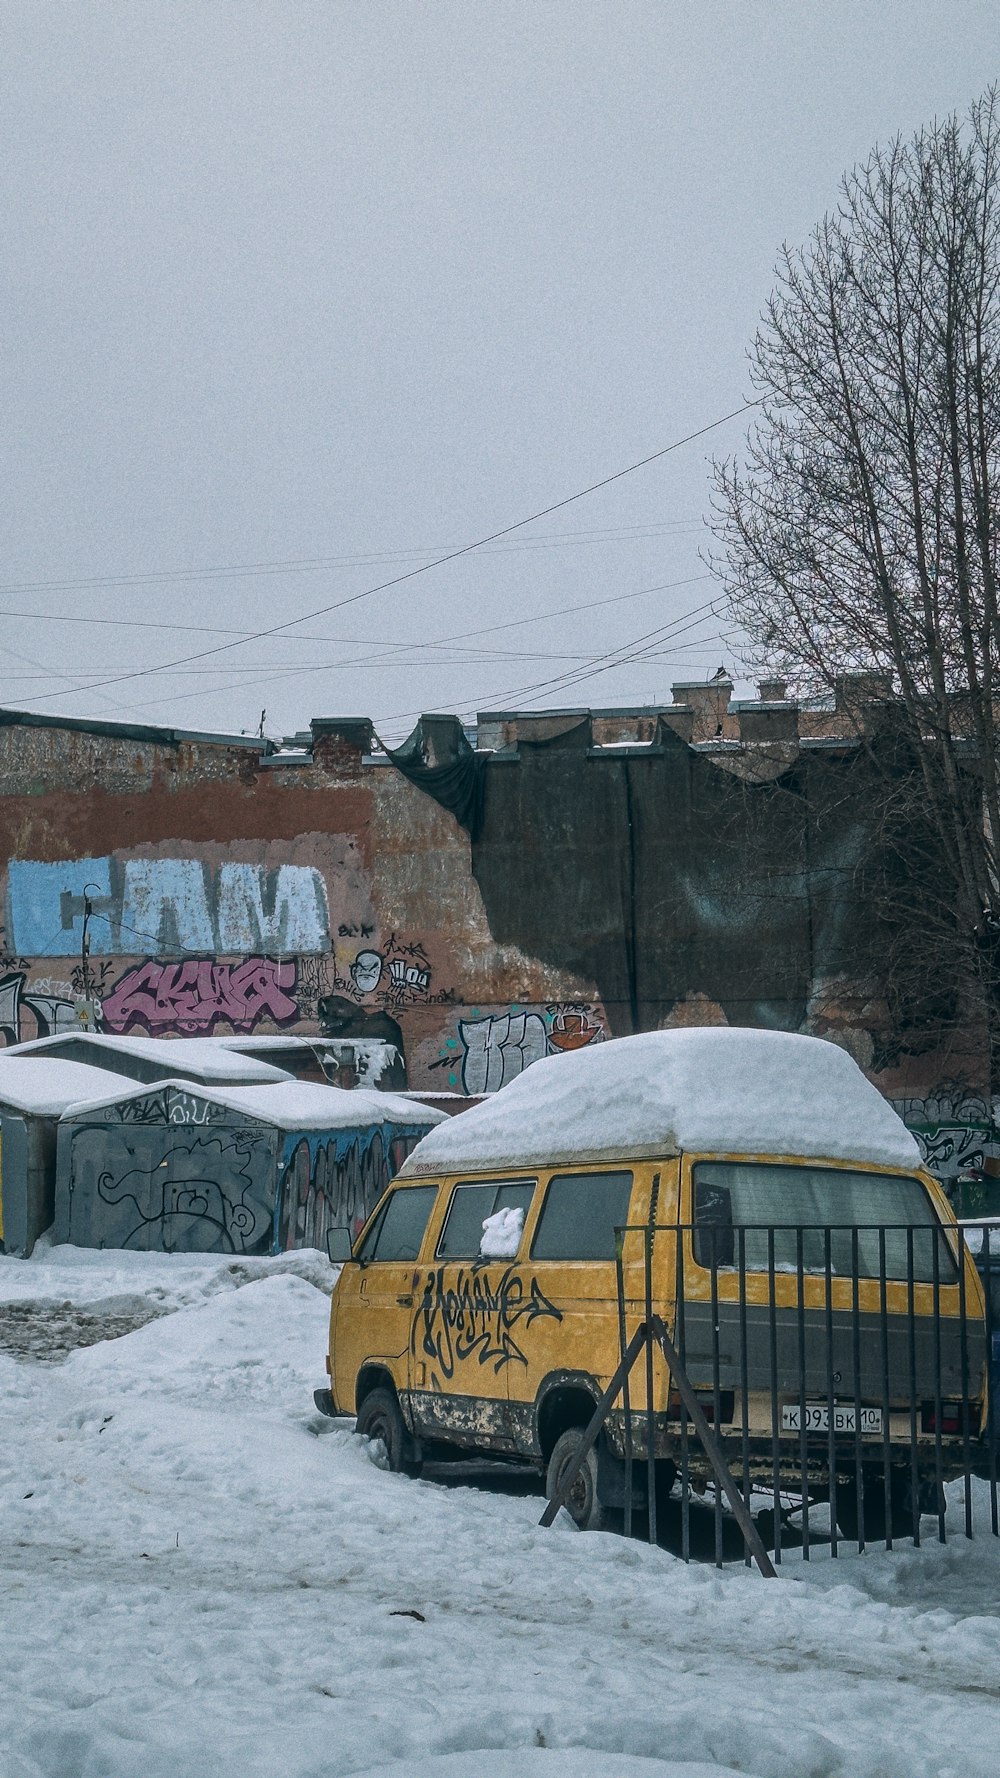 a yellow van parked in the snow near a building